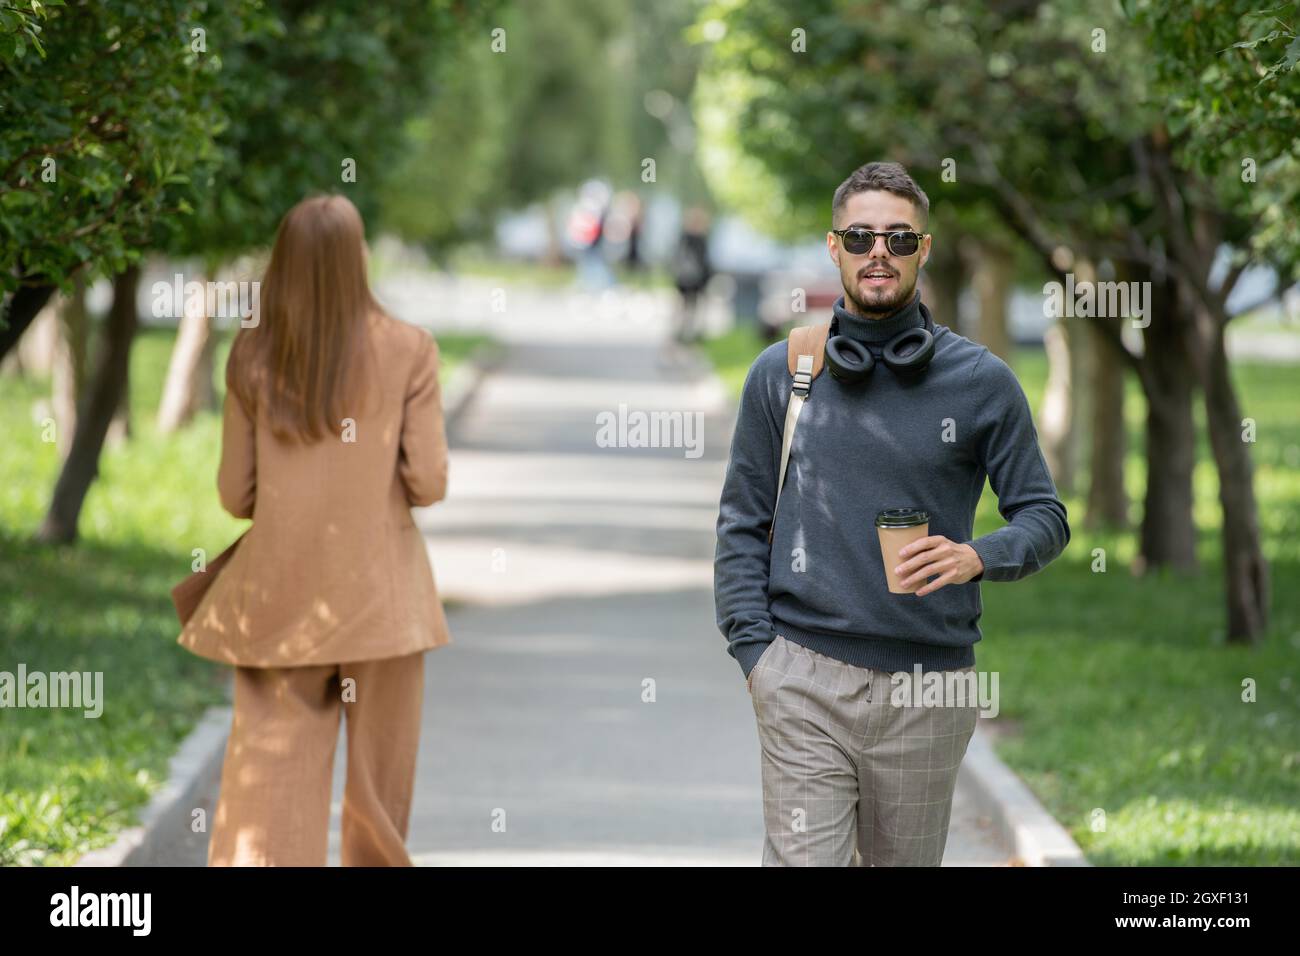 Handsome guy with drink moving down road in park with young female in suit behind Stock Photo